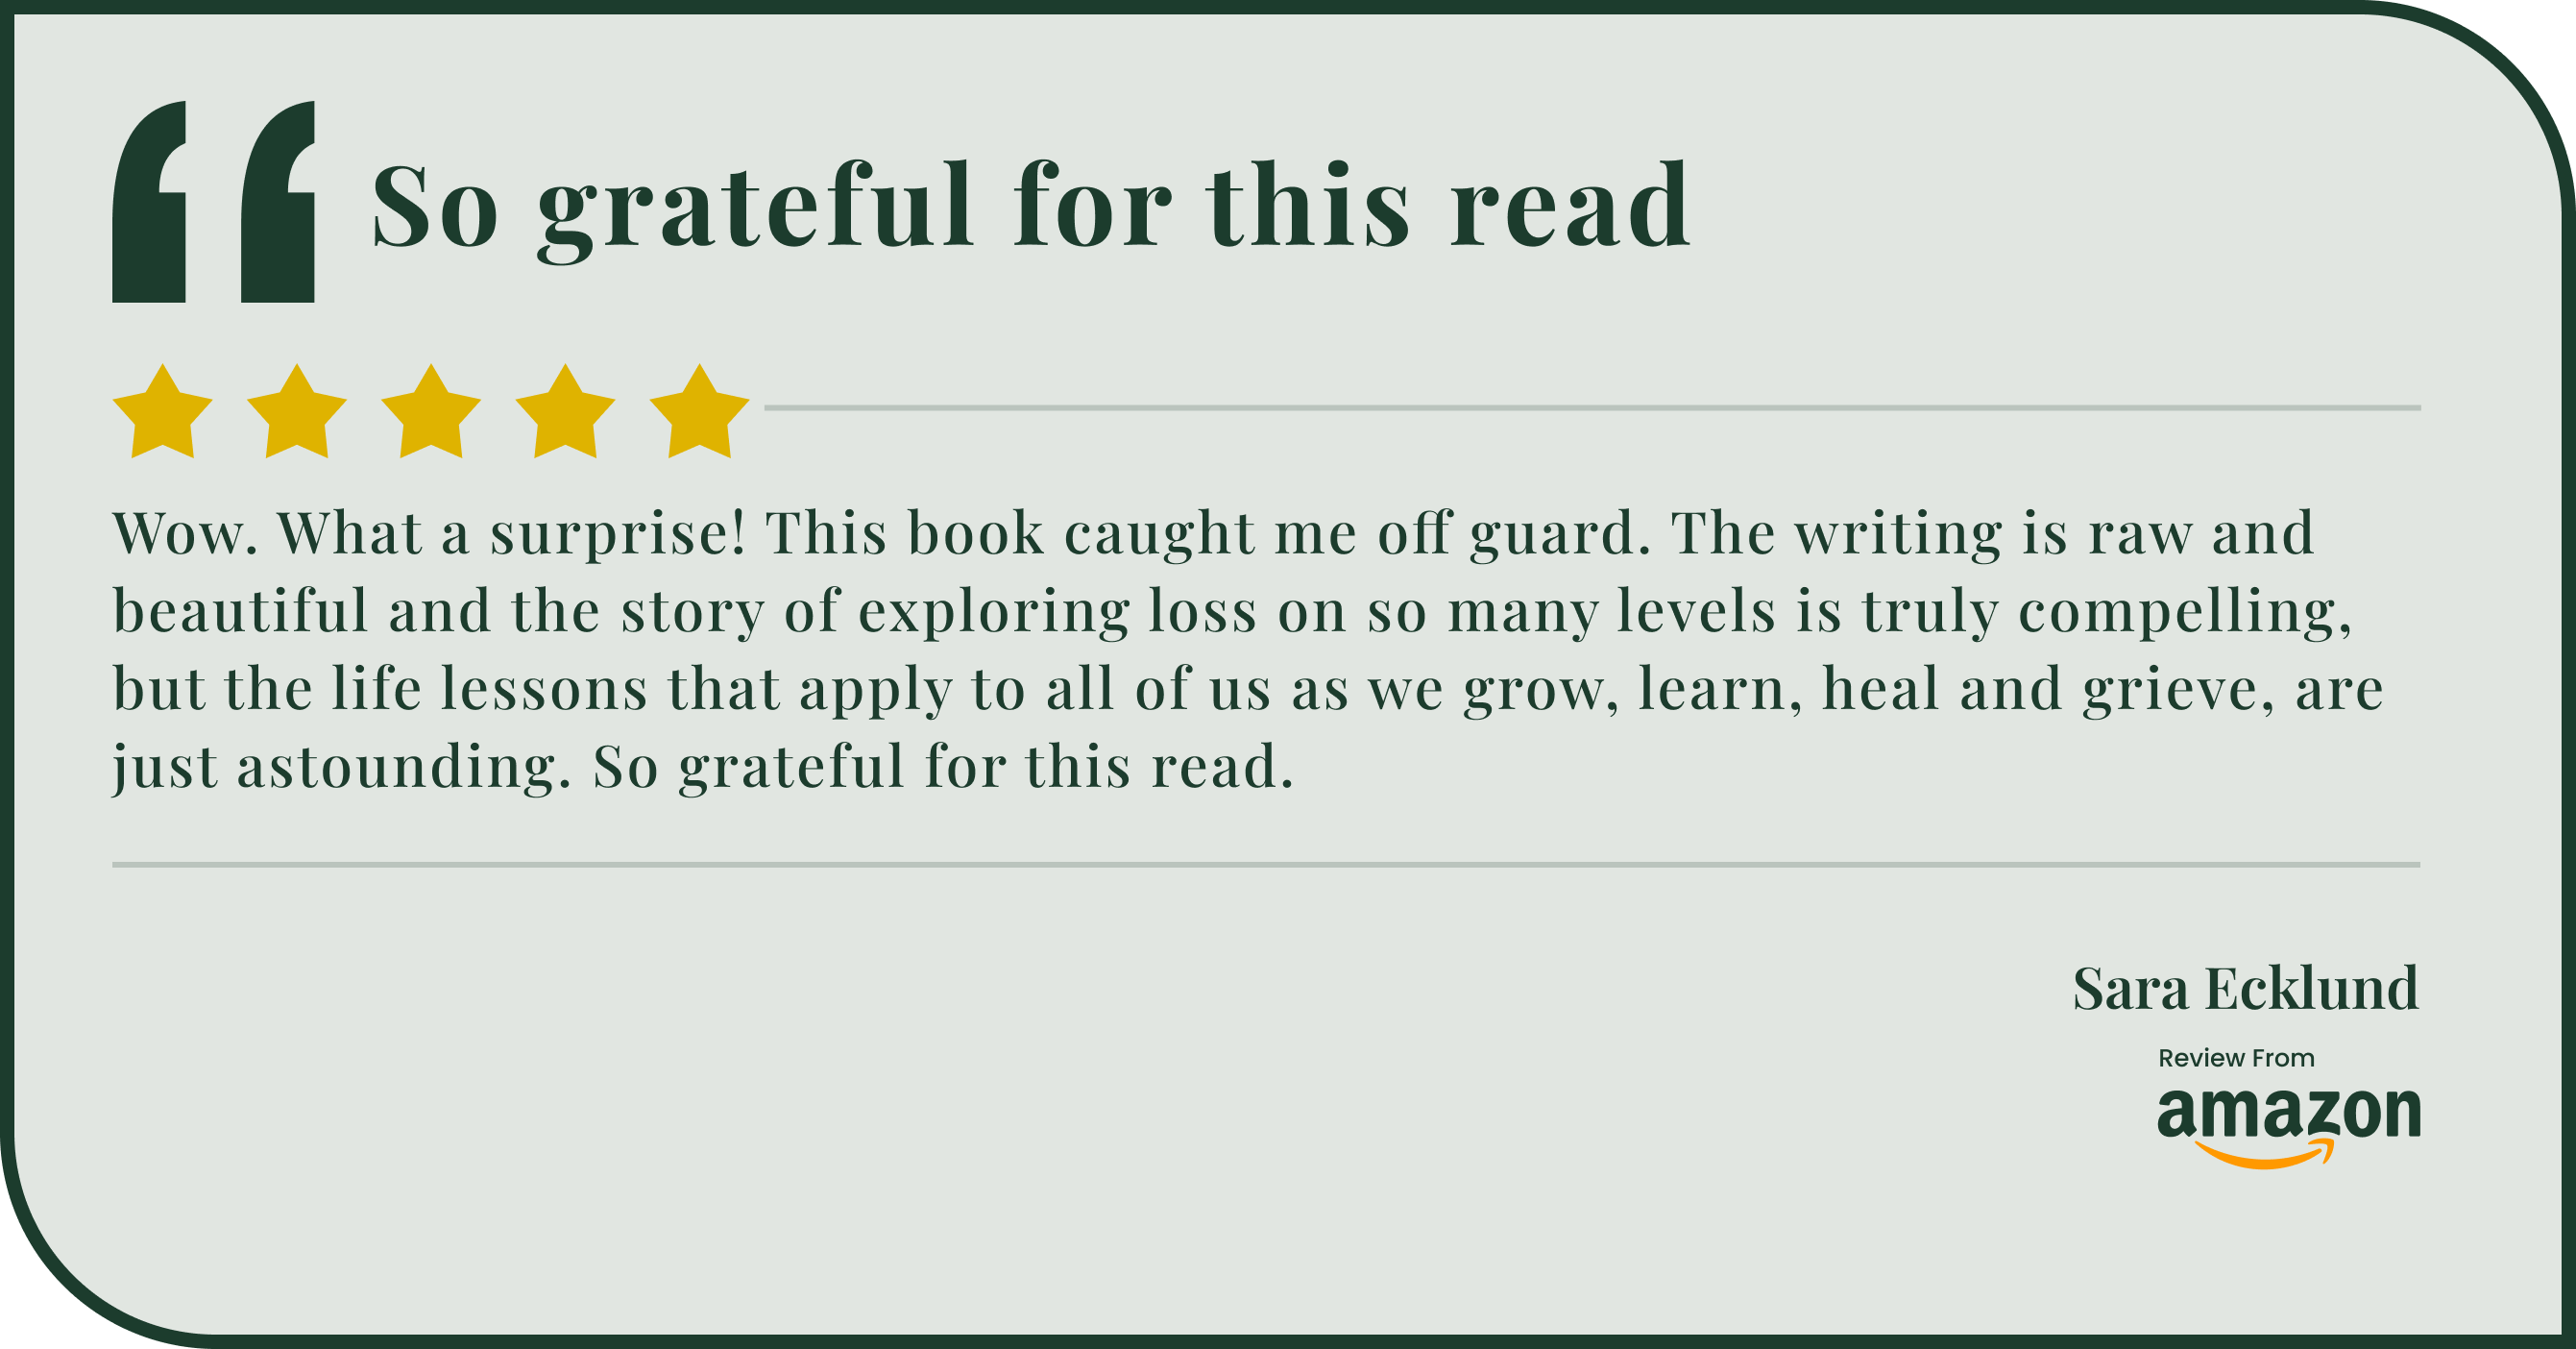 5-star book review expressing gratitude for impactful read.